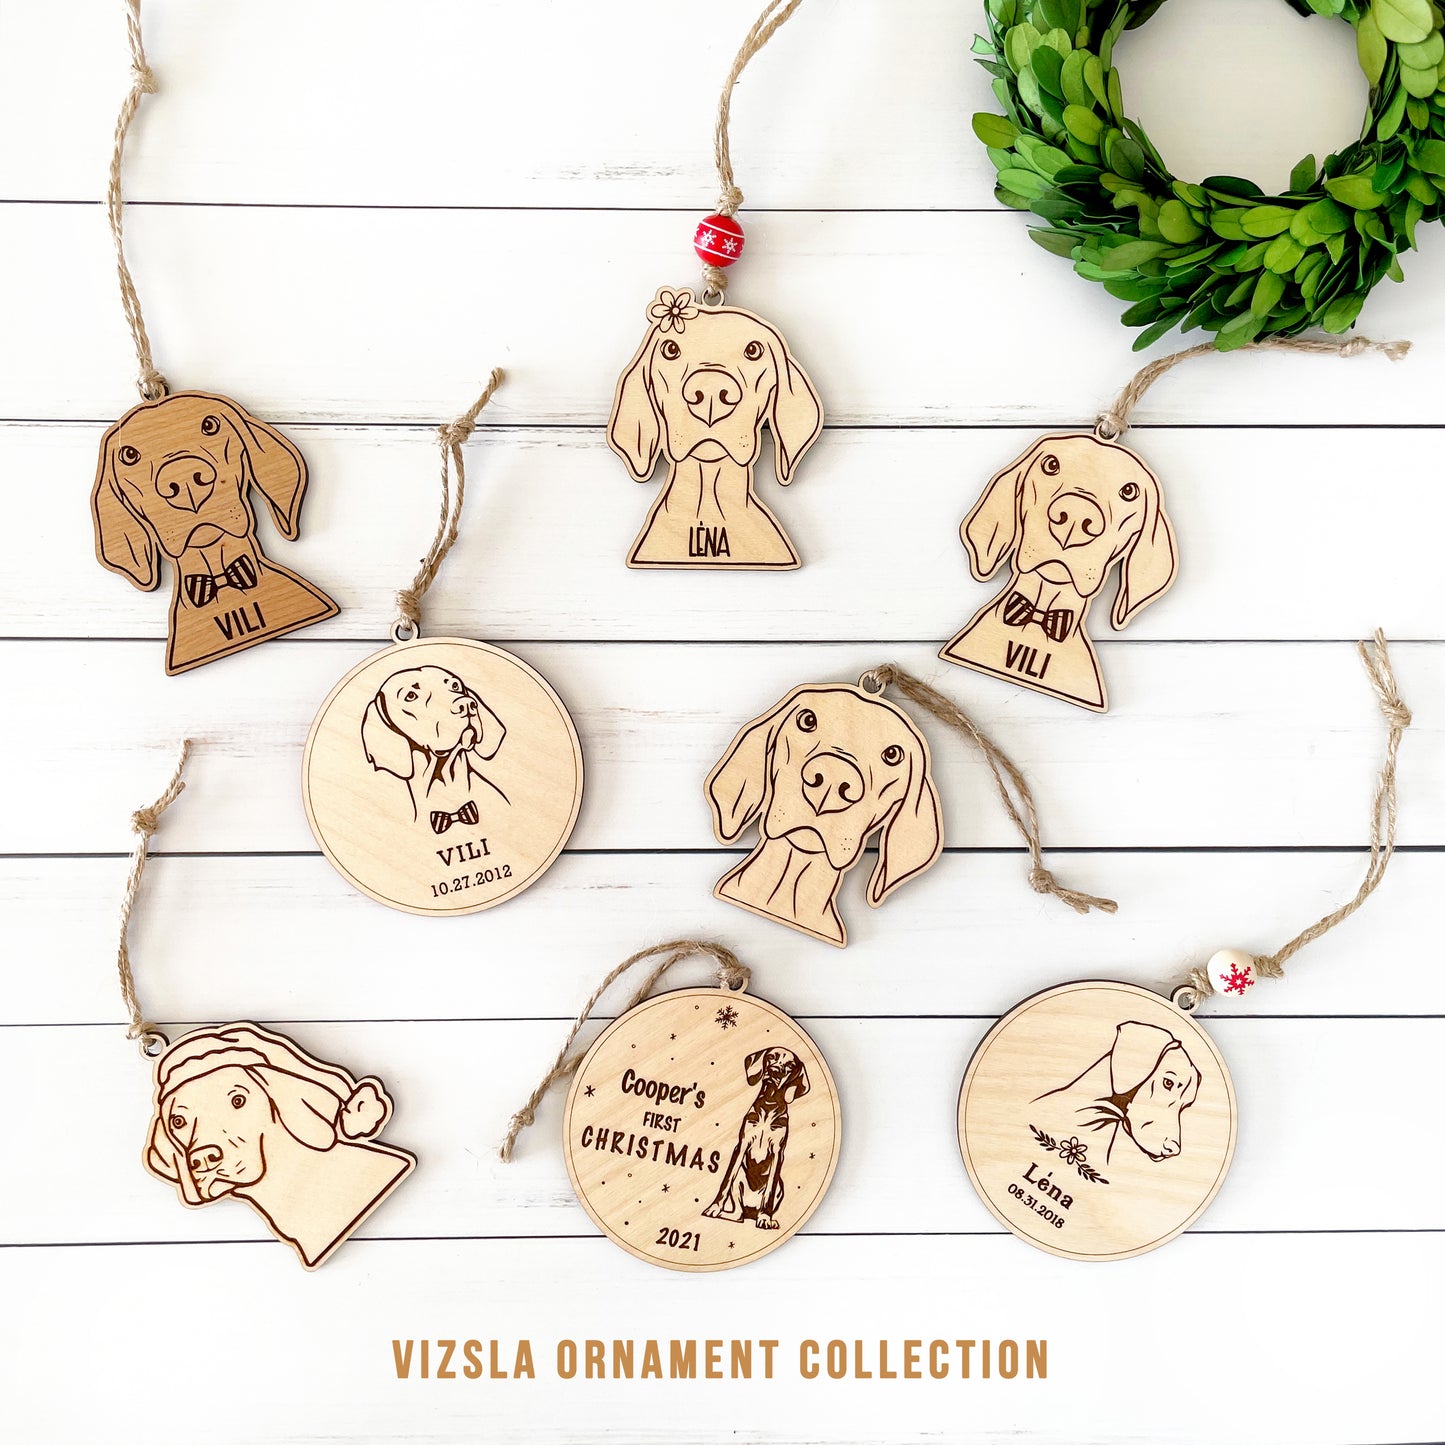 Engraved personalized Vizsla ornaments, many with DIY options